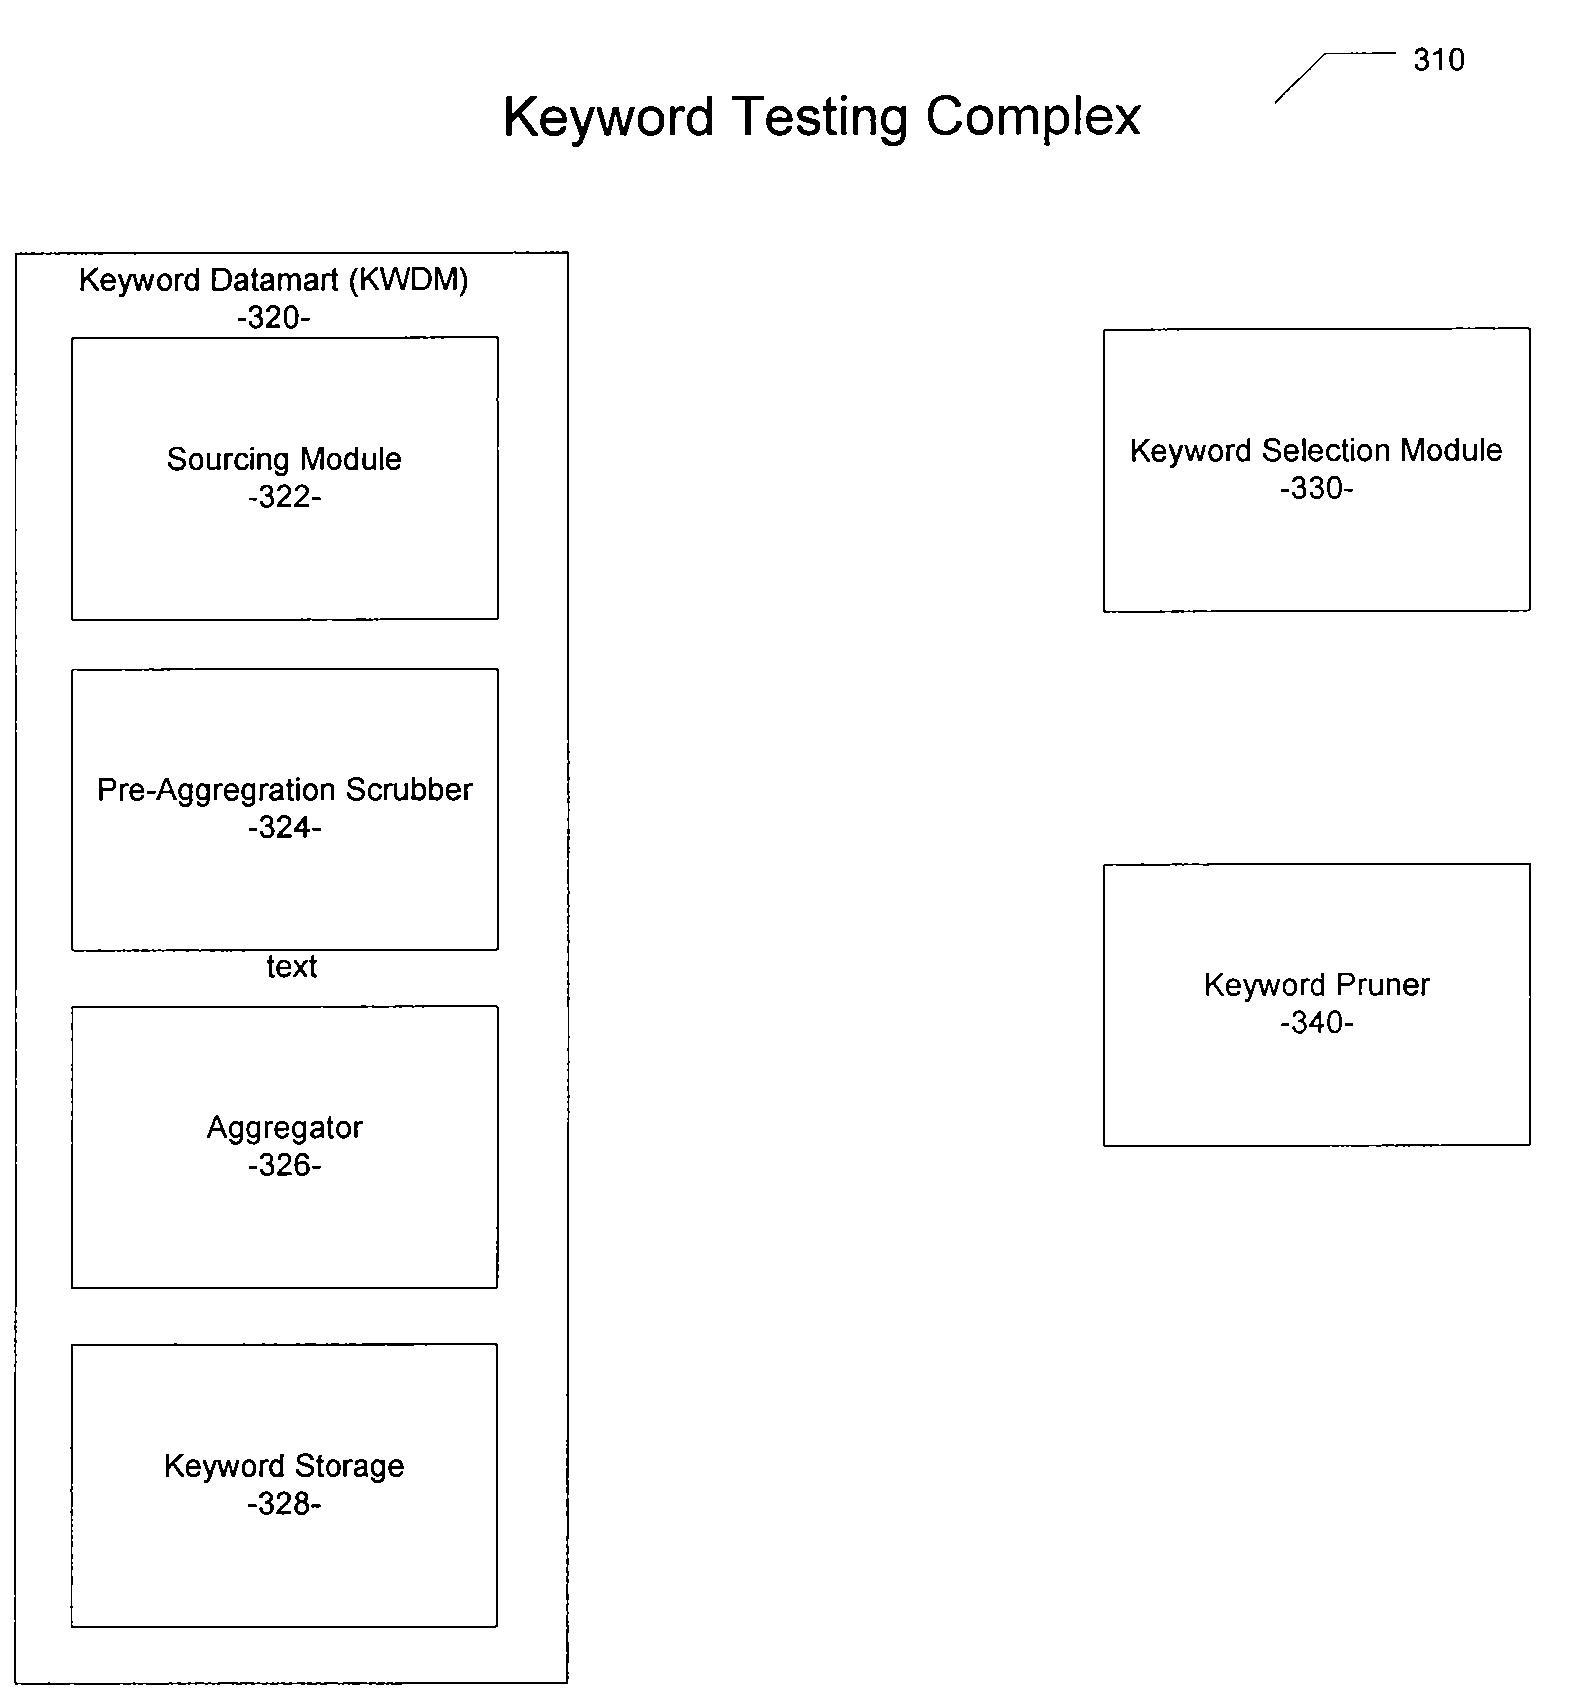 Computer-implemented method and system for combining keywords into logical clusters that share similar behavior with respect to a considered dimension